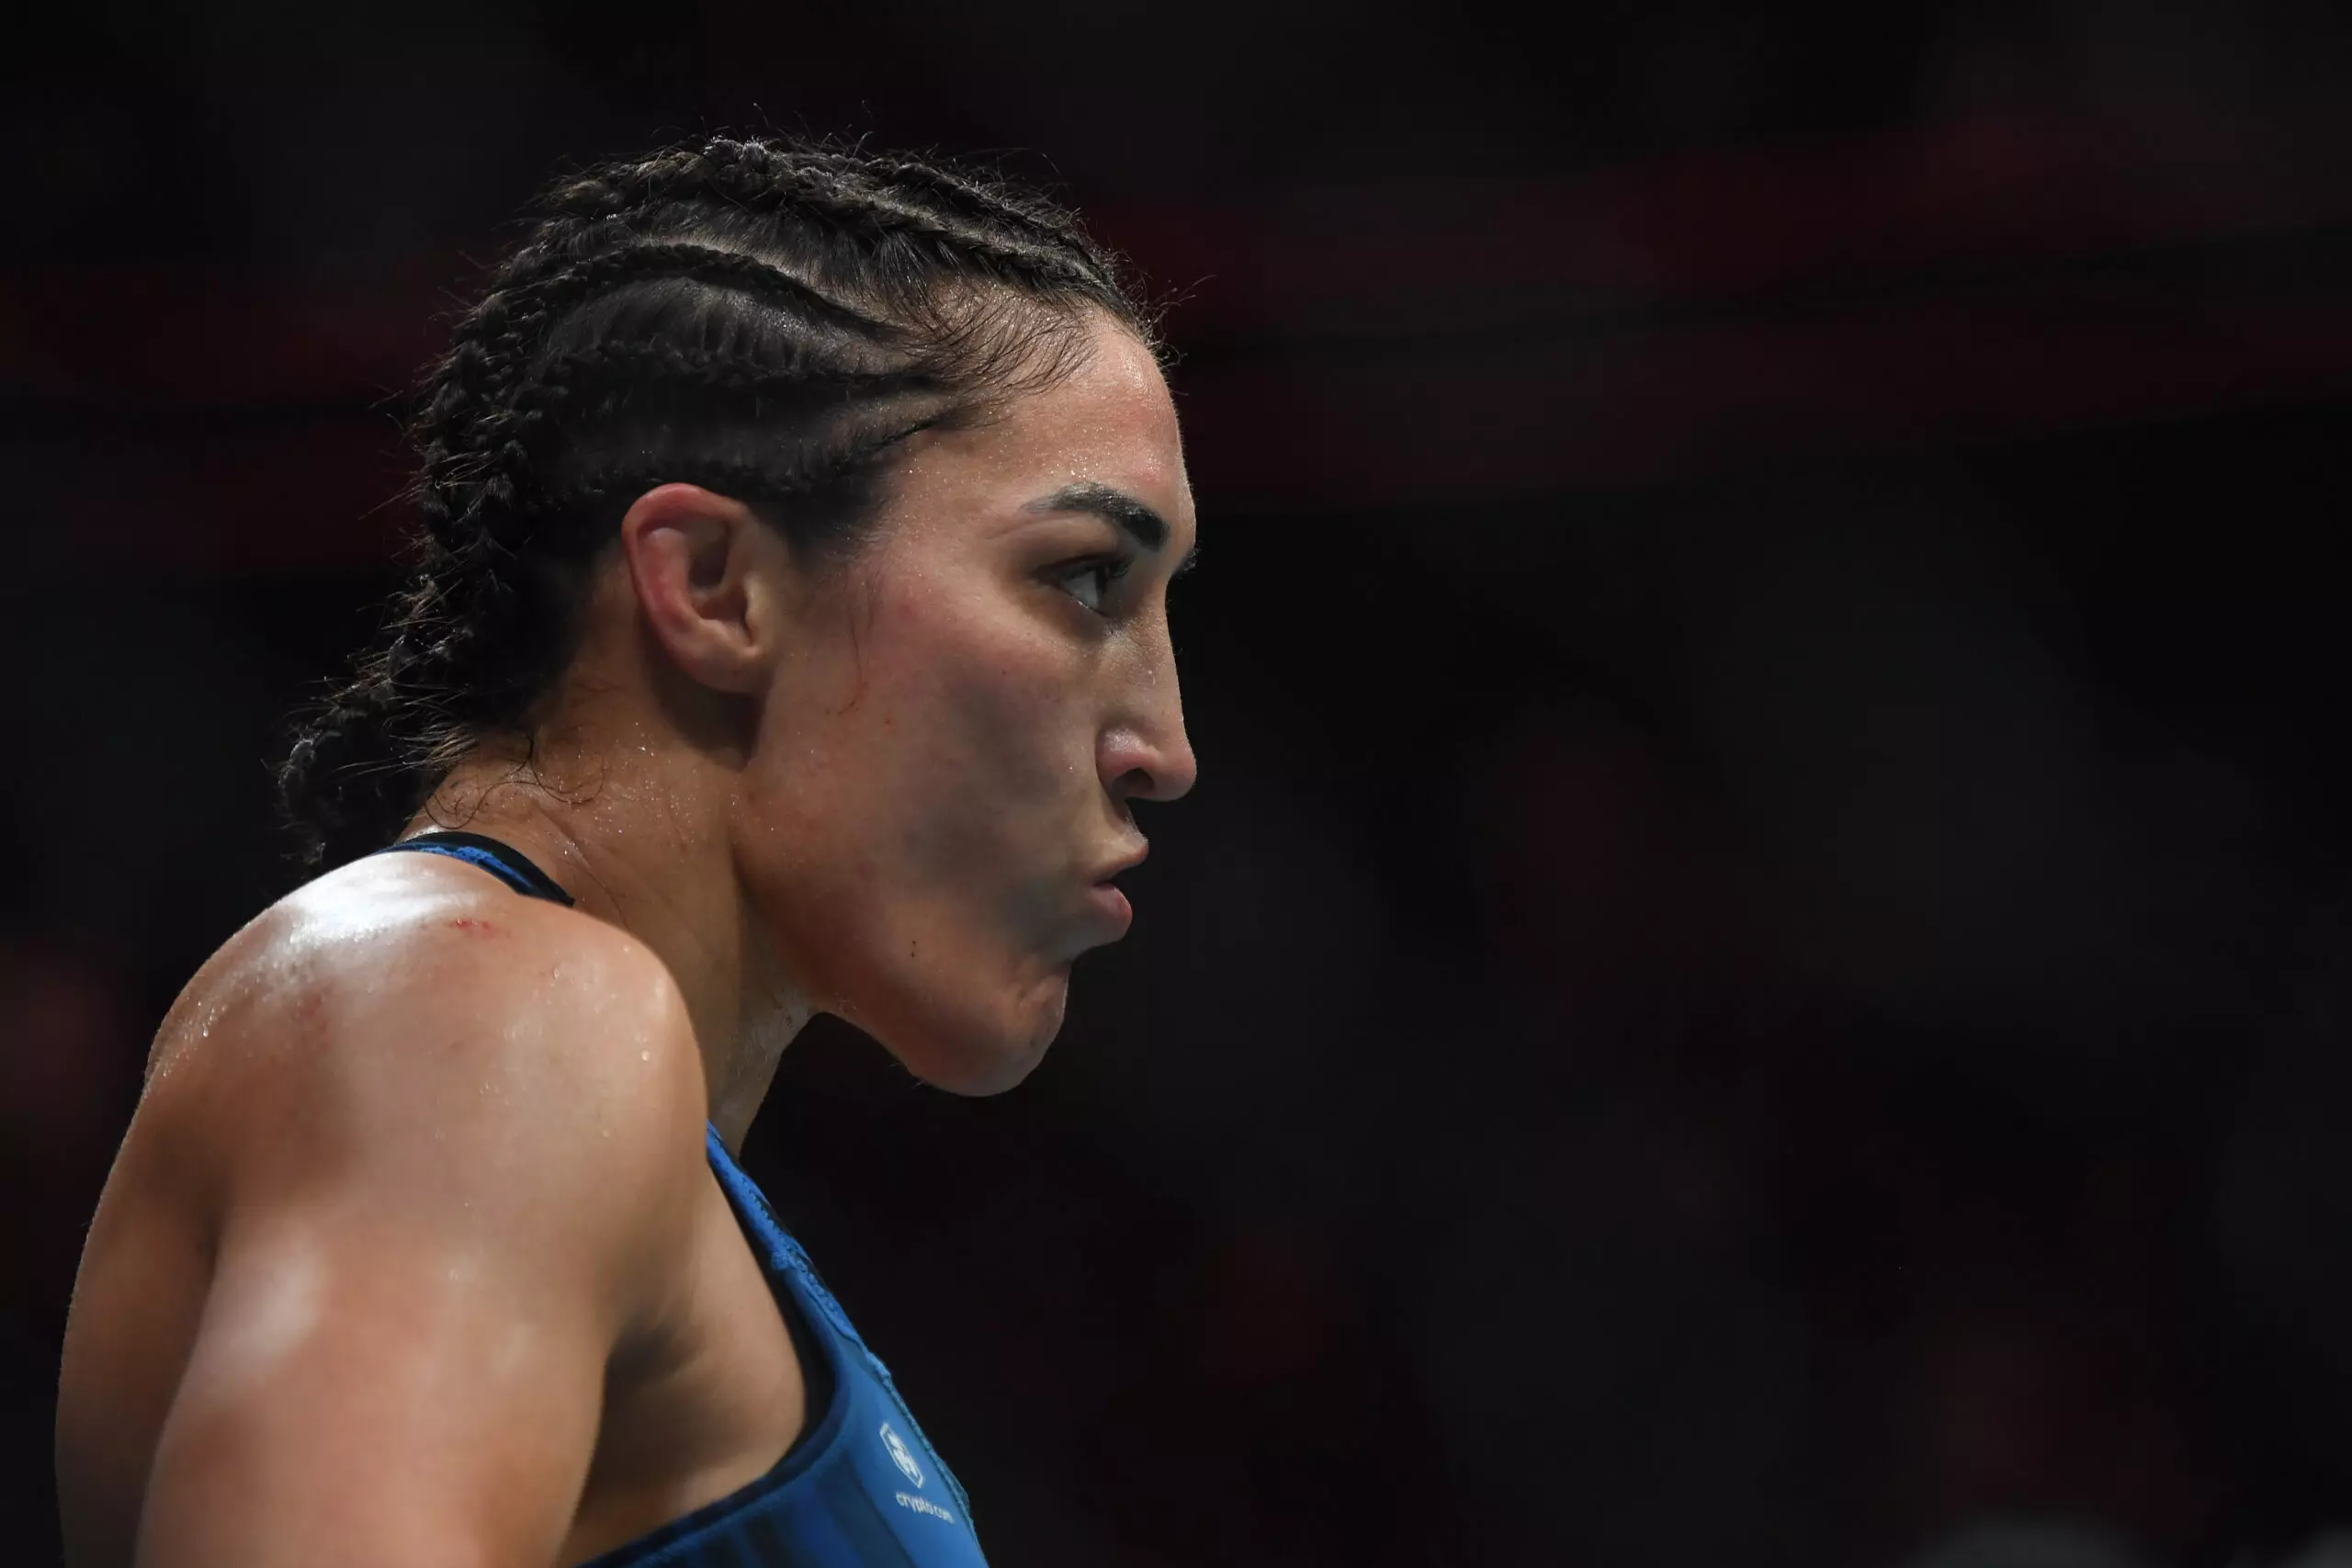 Tatiana Suarez lays out her plan for a potential UFC return after recovering from injury, stating confidently, "If not, then I'm aiming for the title shot."